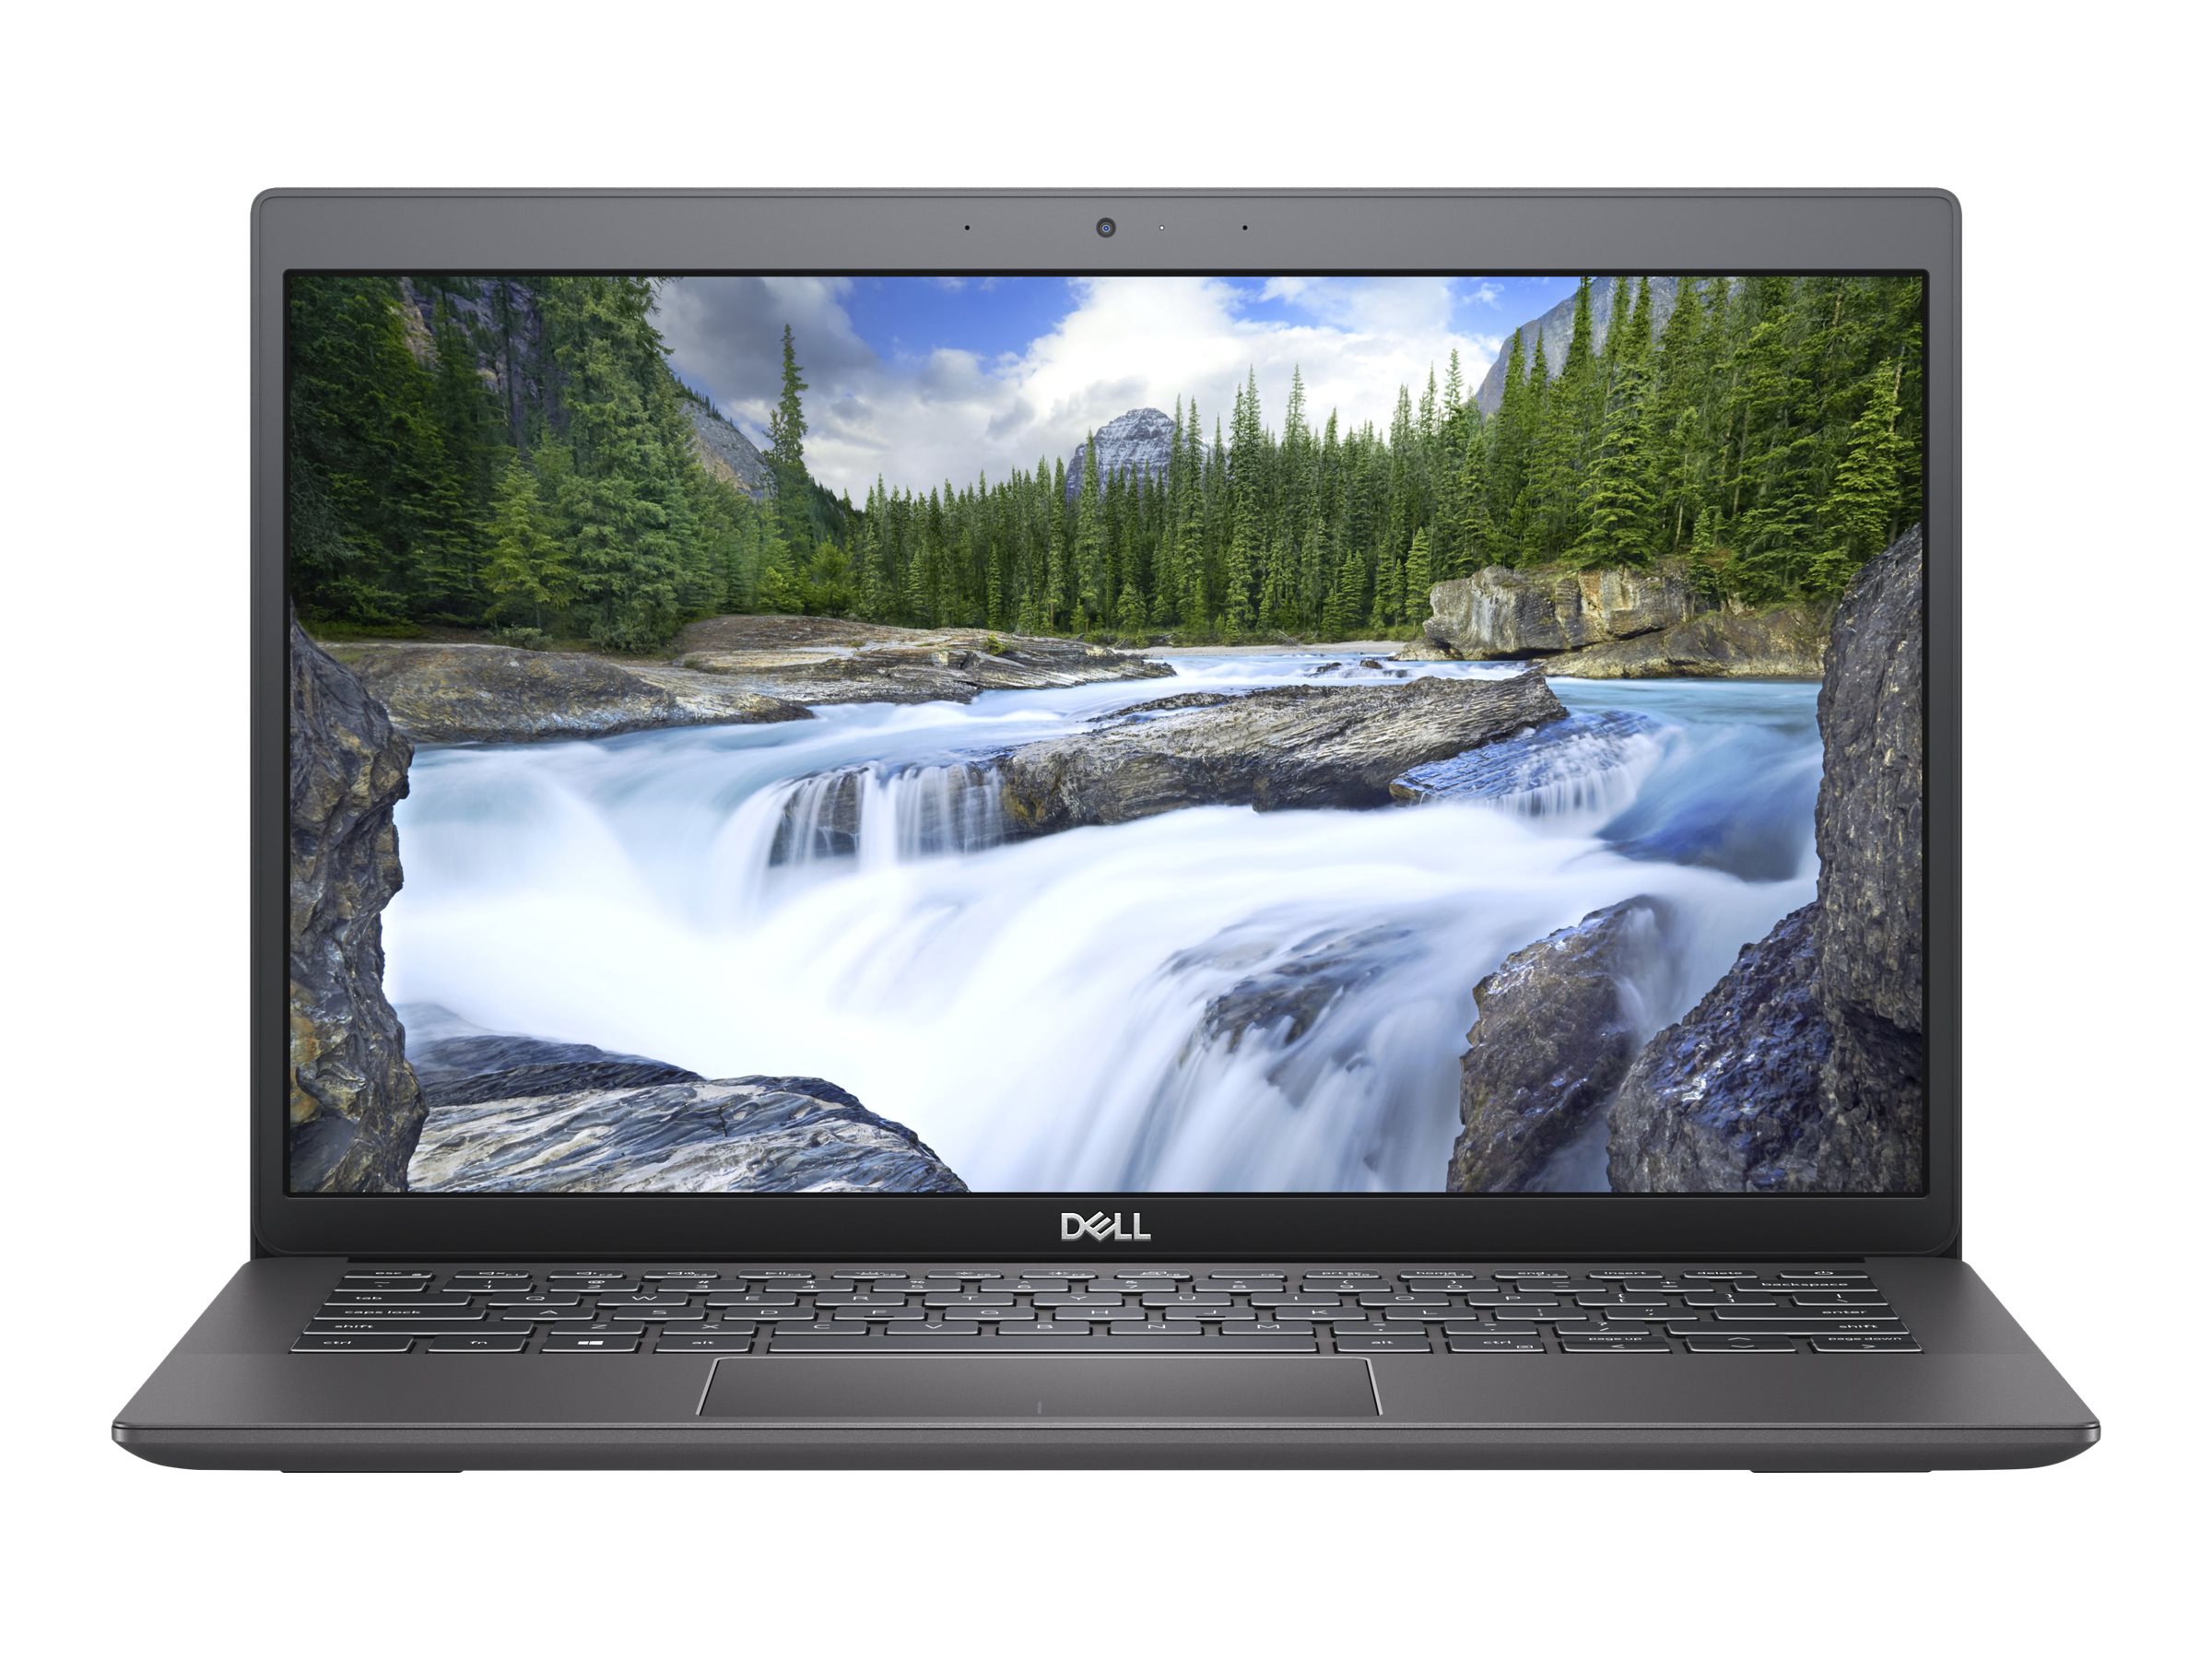 Dell Latitude 3301 - full specs, details and review